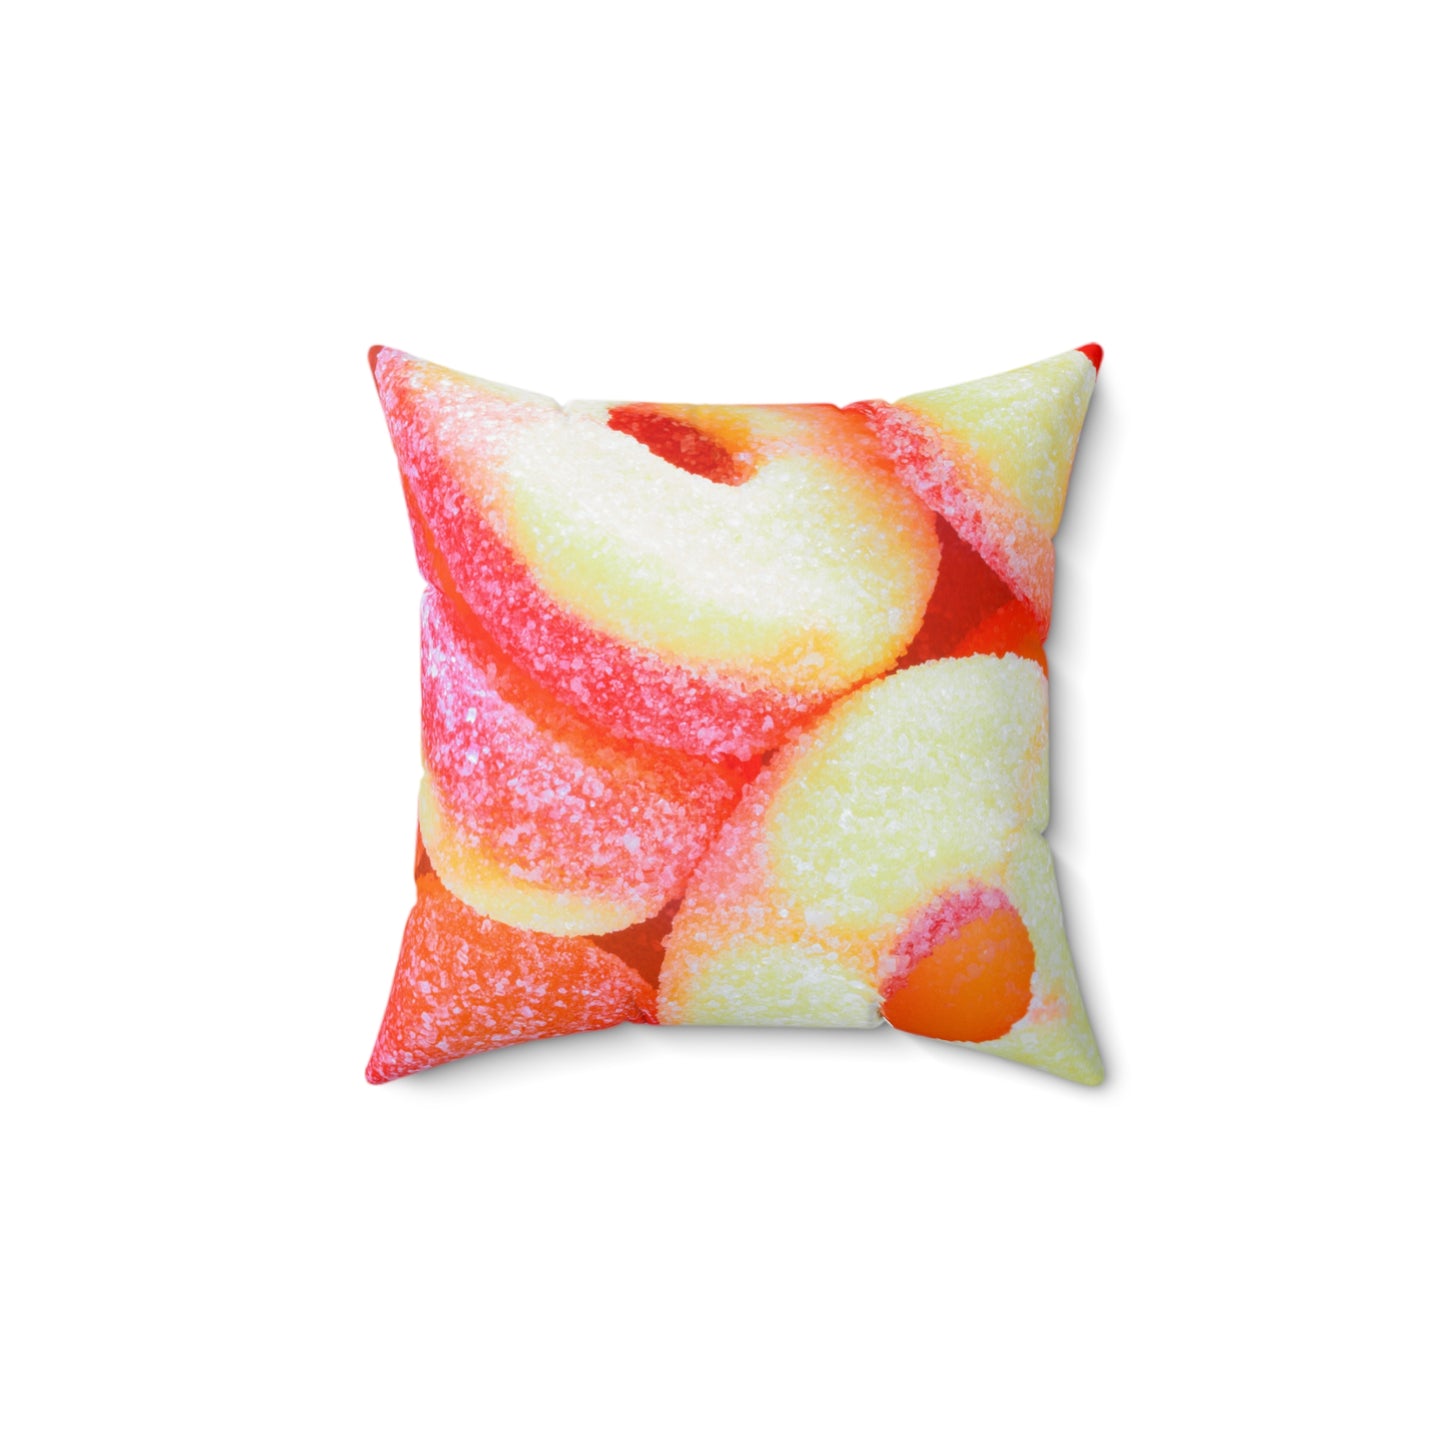 Sweet Peach Candy Rings Square Pillow